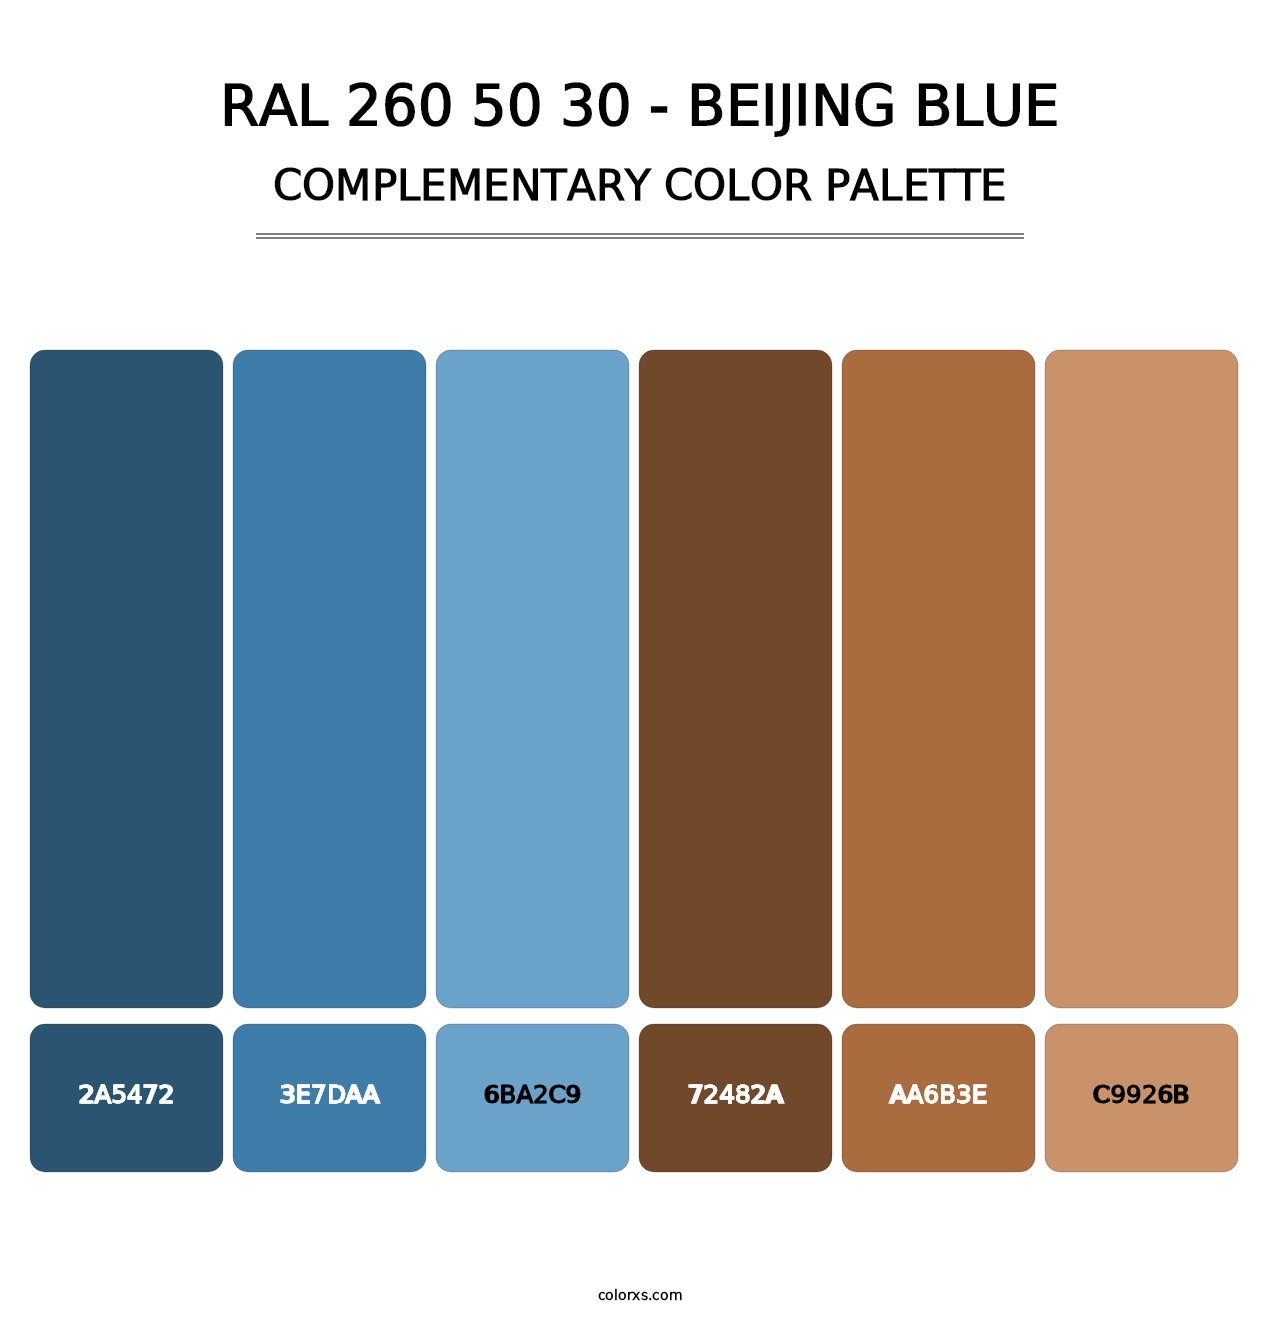 RAL 260 50 30 - Beijing Blue - Complementary Color Palette